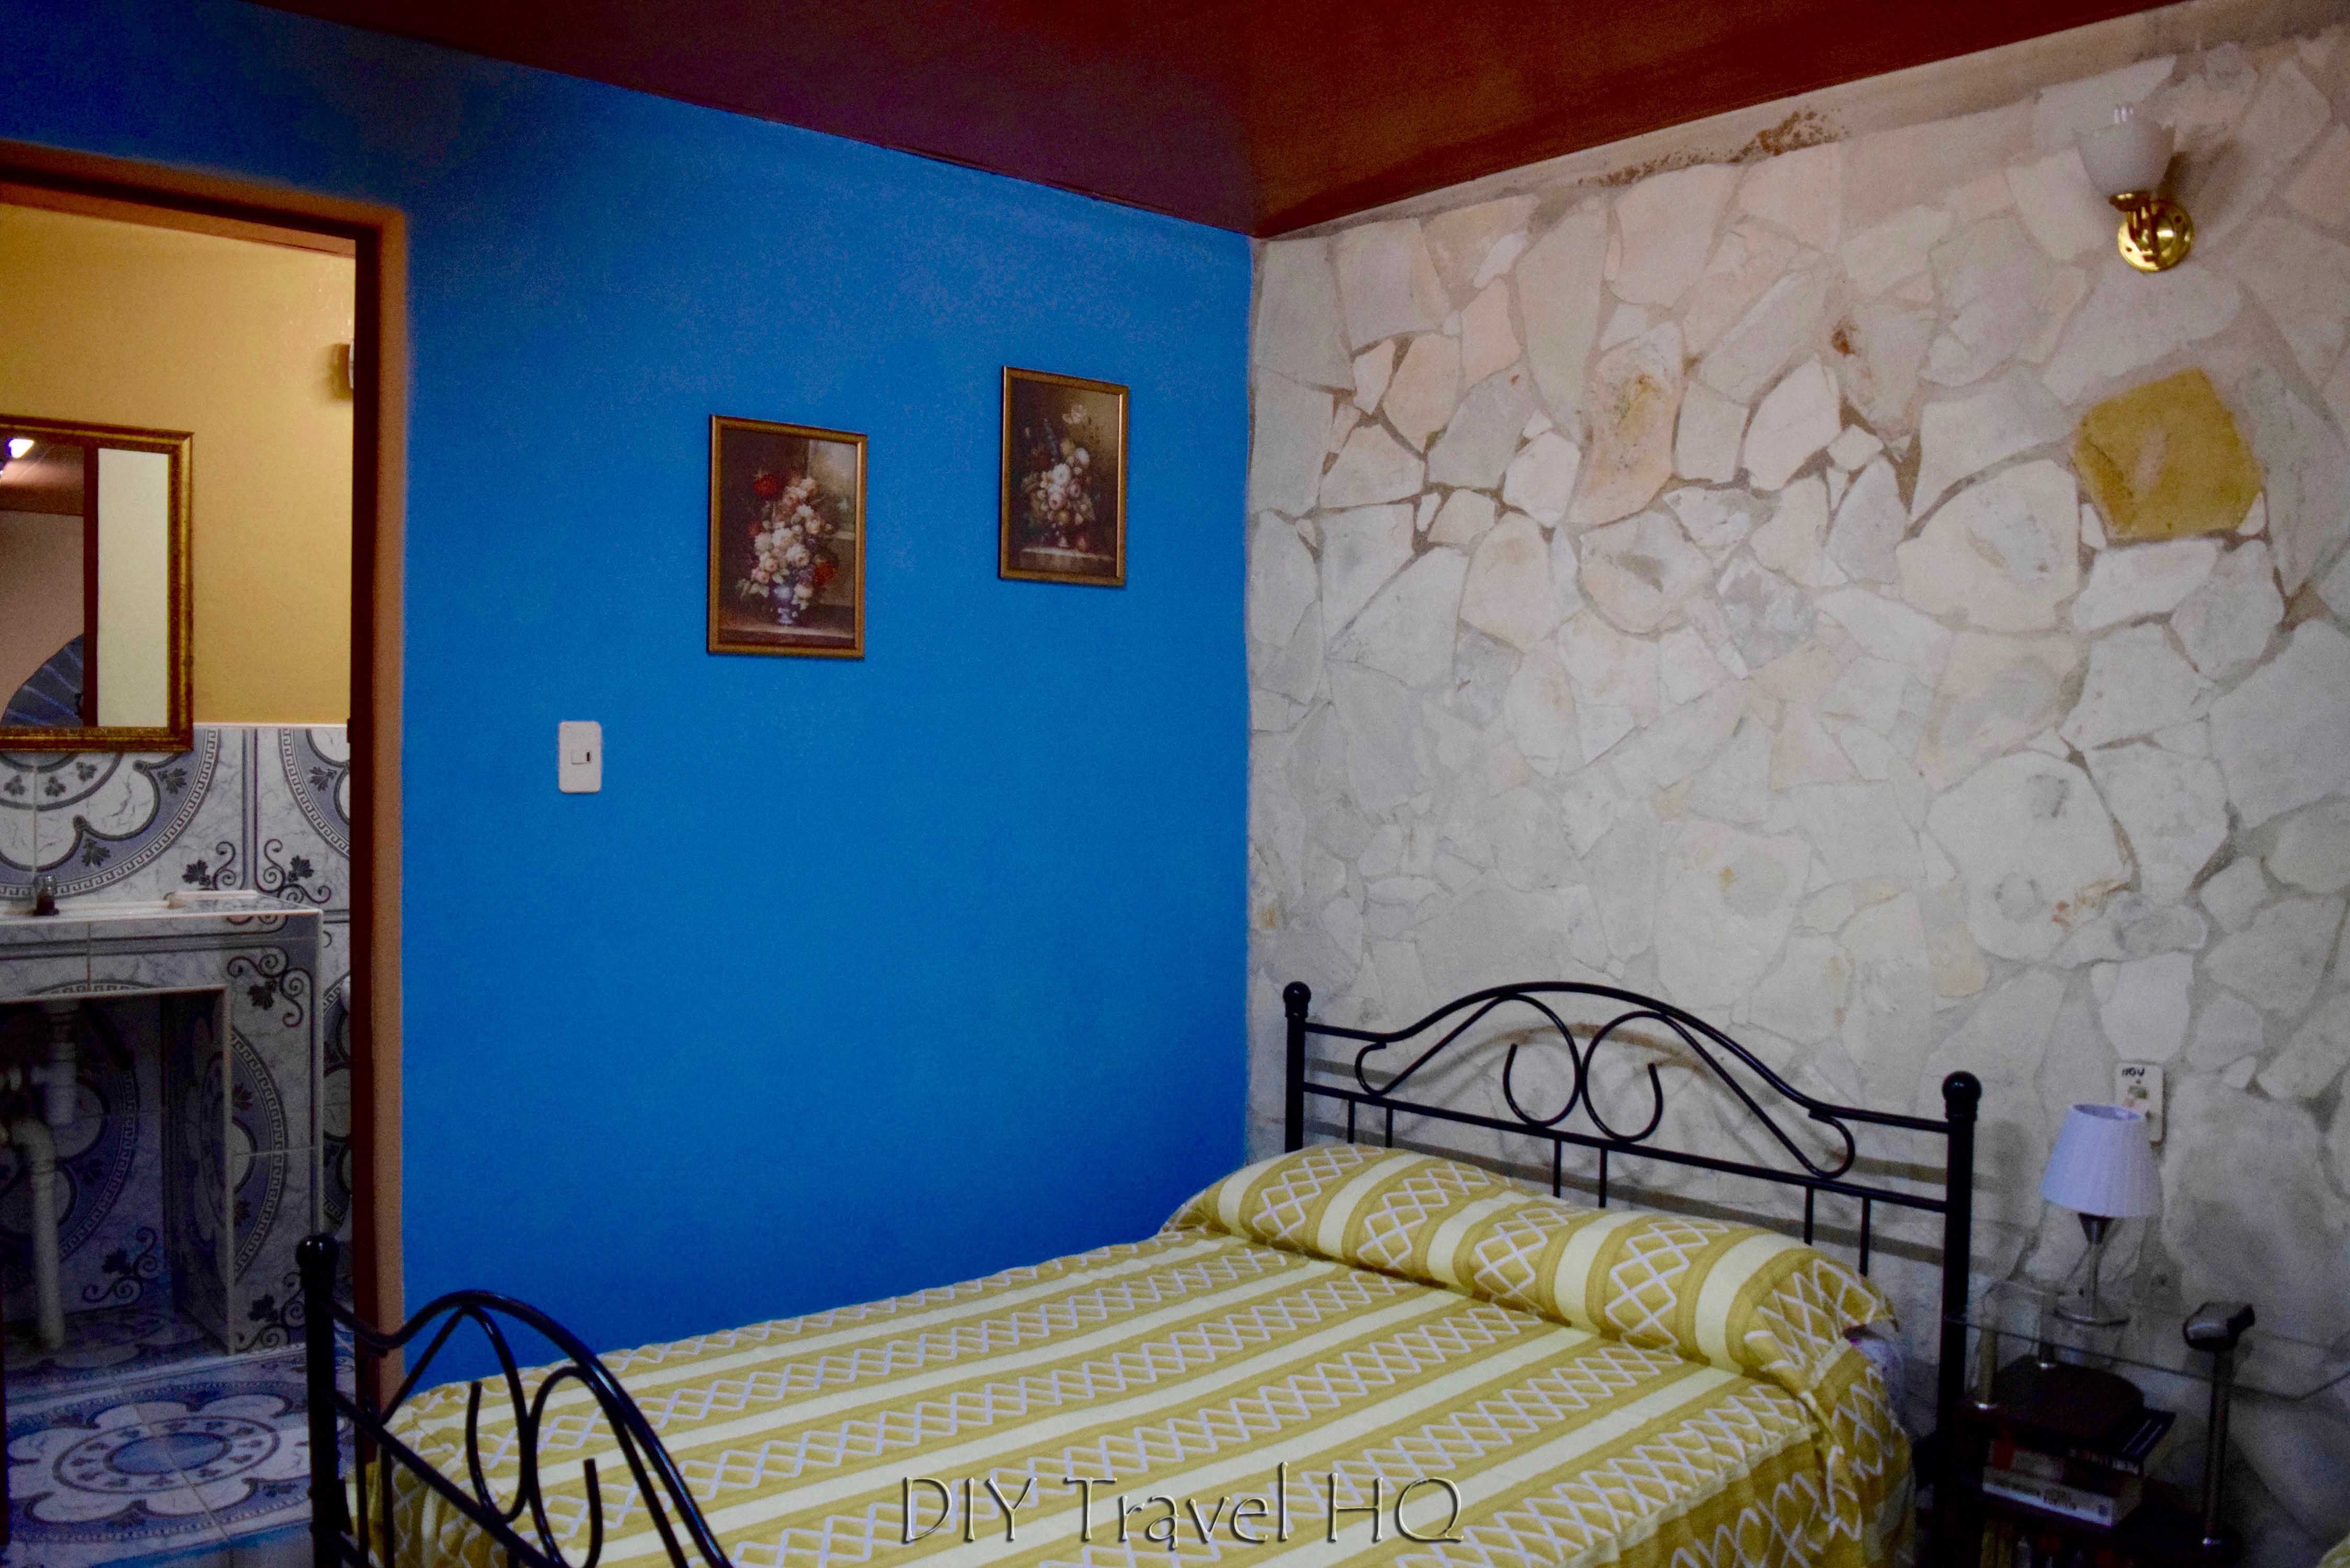 Casa Particulares: Where to Stay in Havana for $20 - DIY Travel HQ